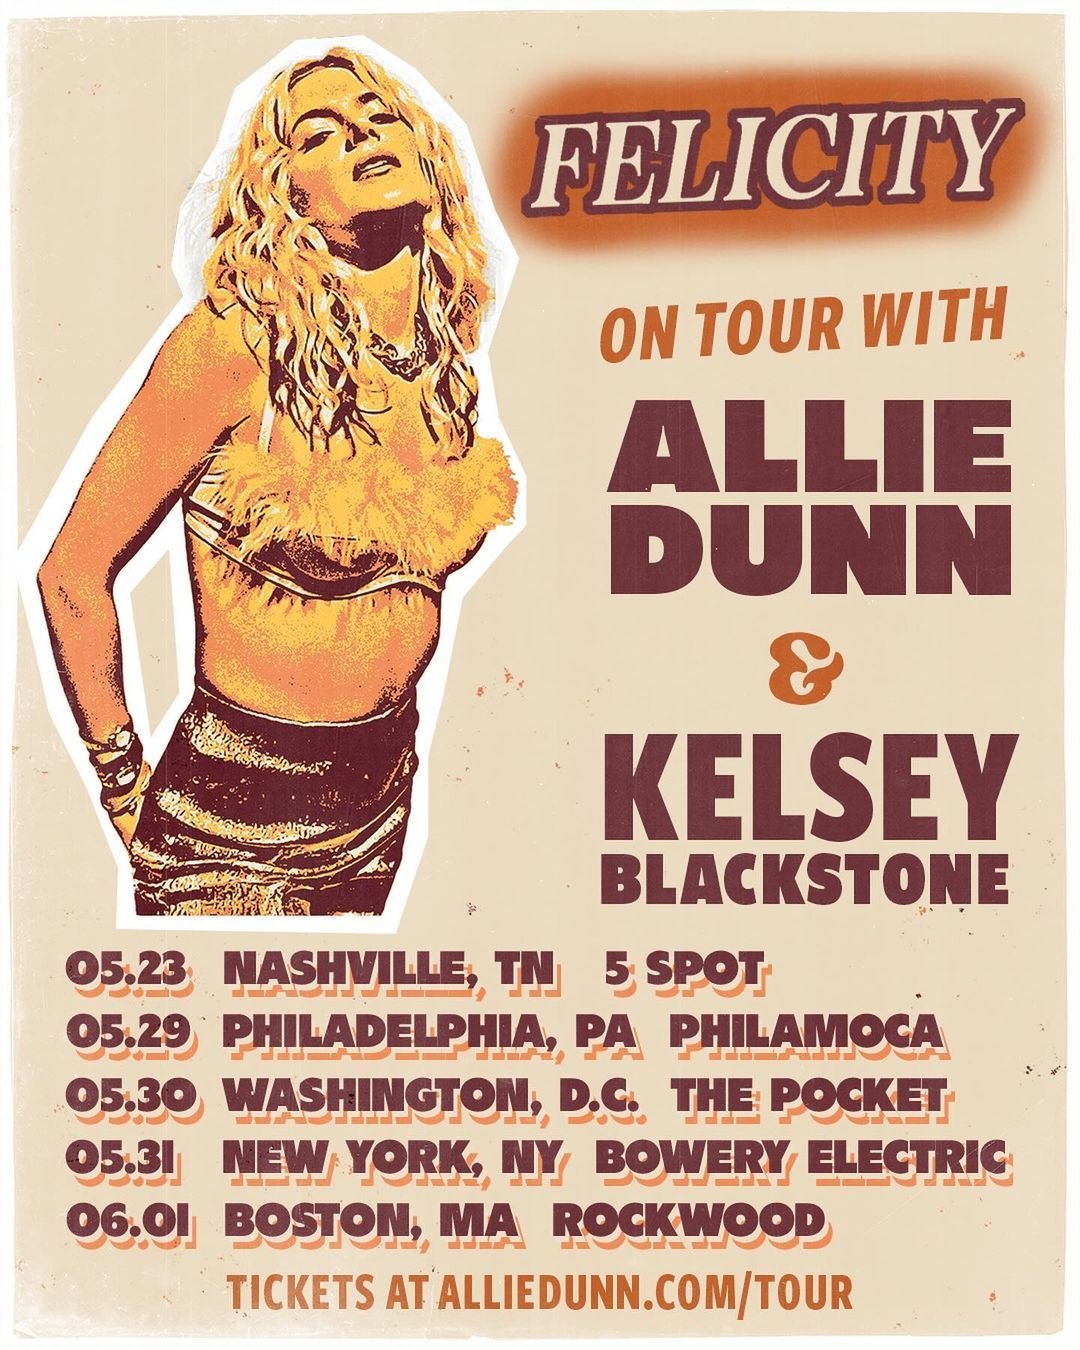 Felicity
with Allie Dunn, Kelsey Blackstone

June 1, 6:30pm

Tickets: rockwoodboston.com

Presented by @get2thegigbos @massconcerts